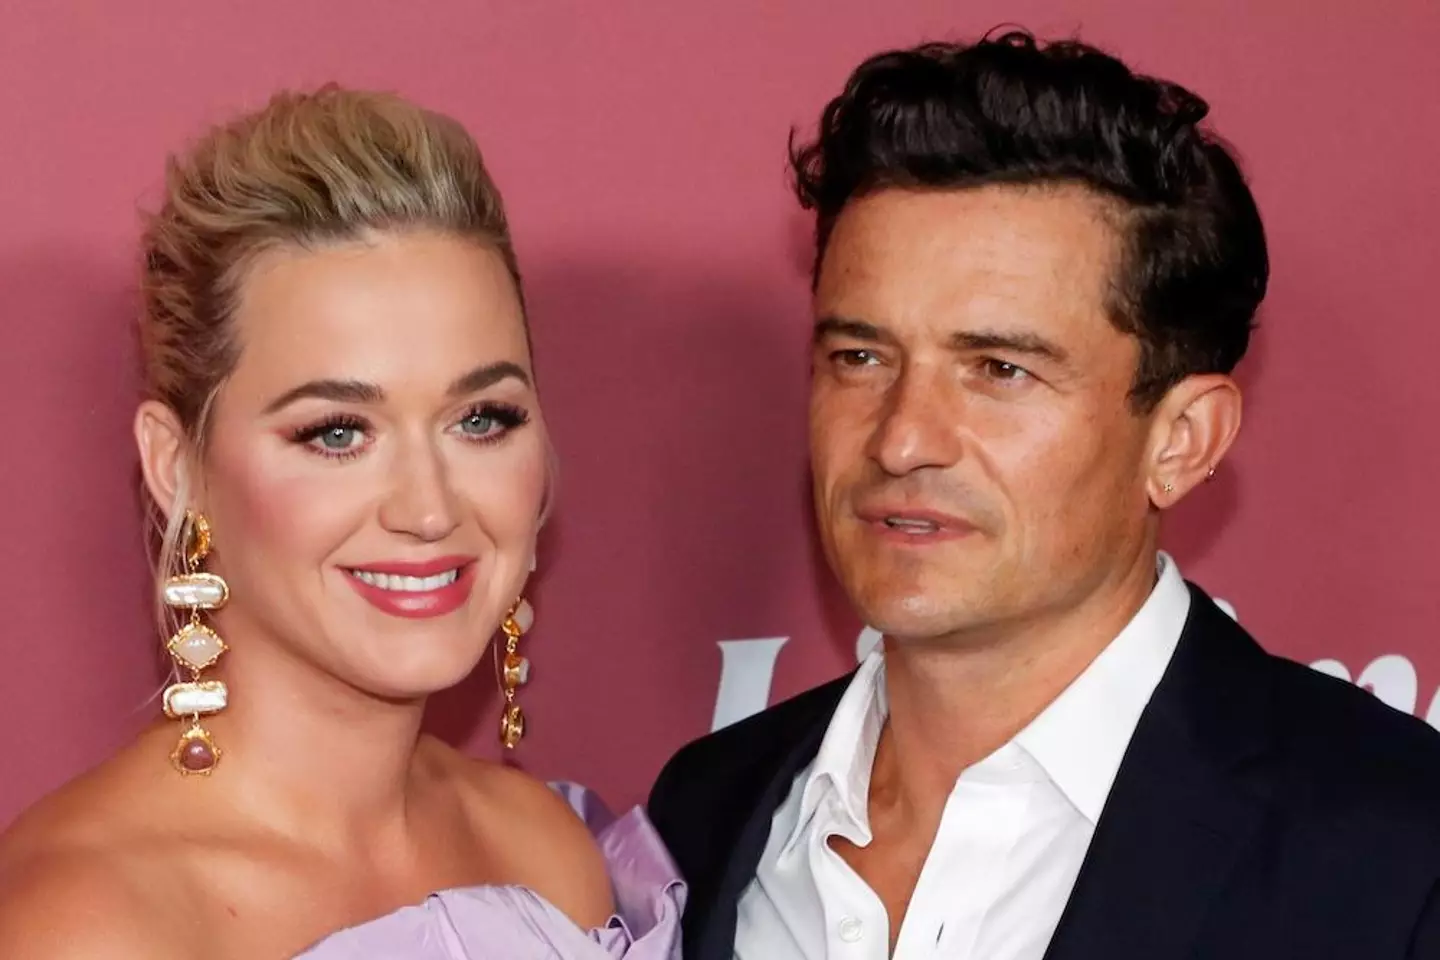 Katy Perry made a sobriety pact with her partner Orlando Bloom.